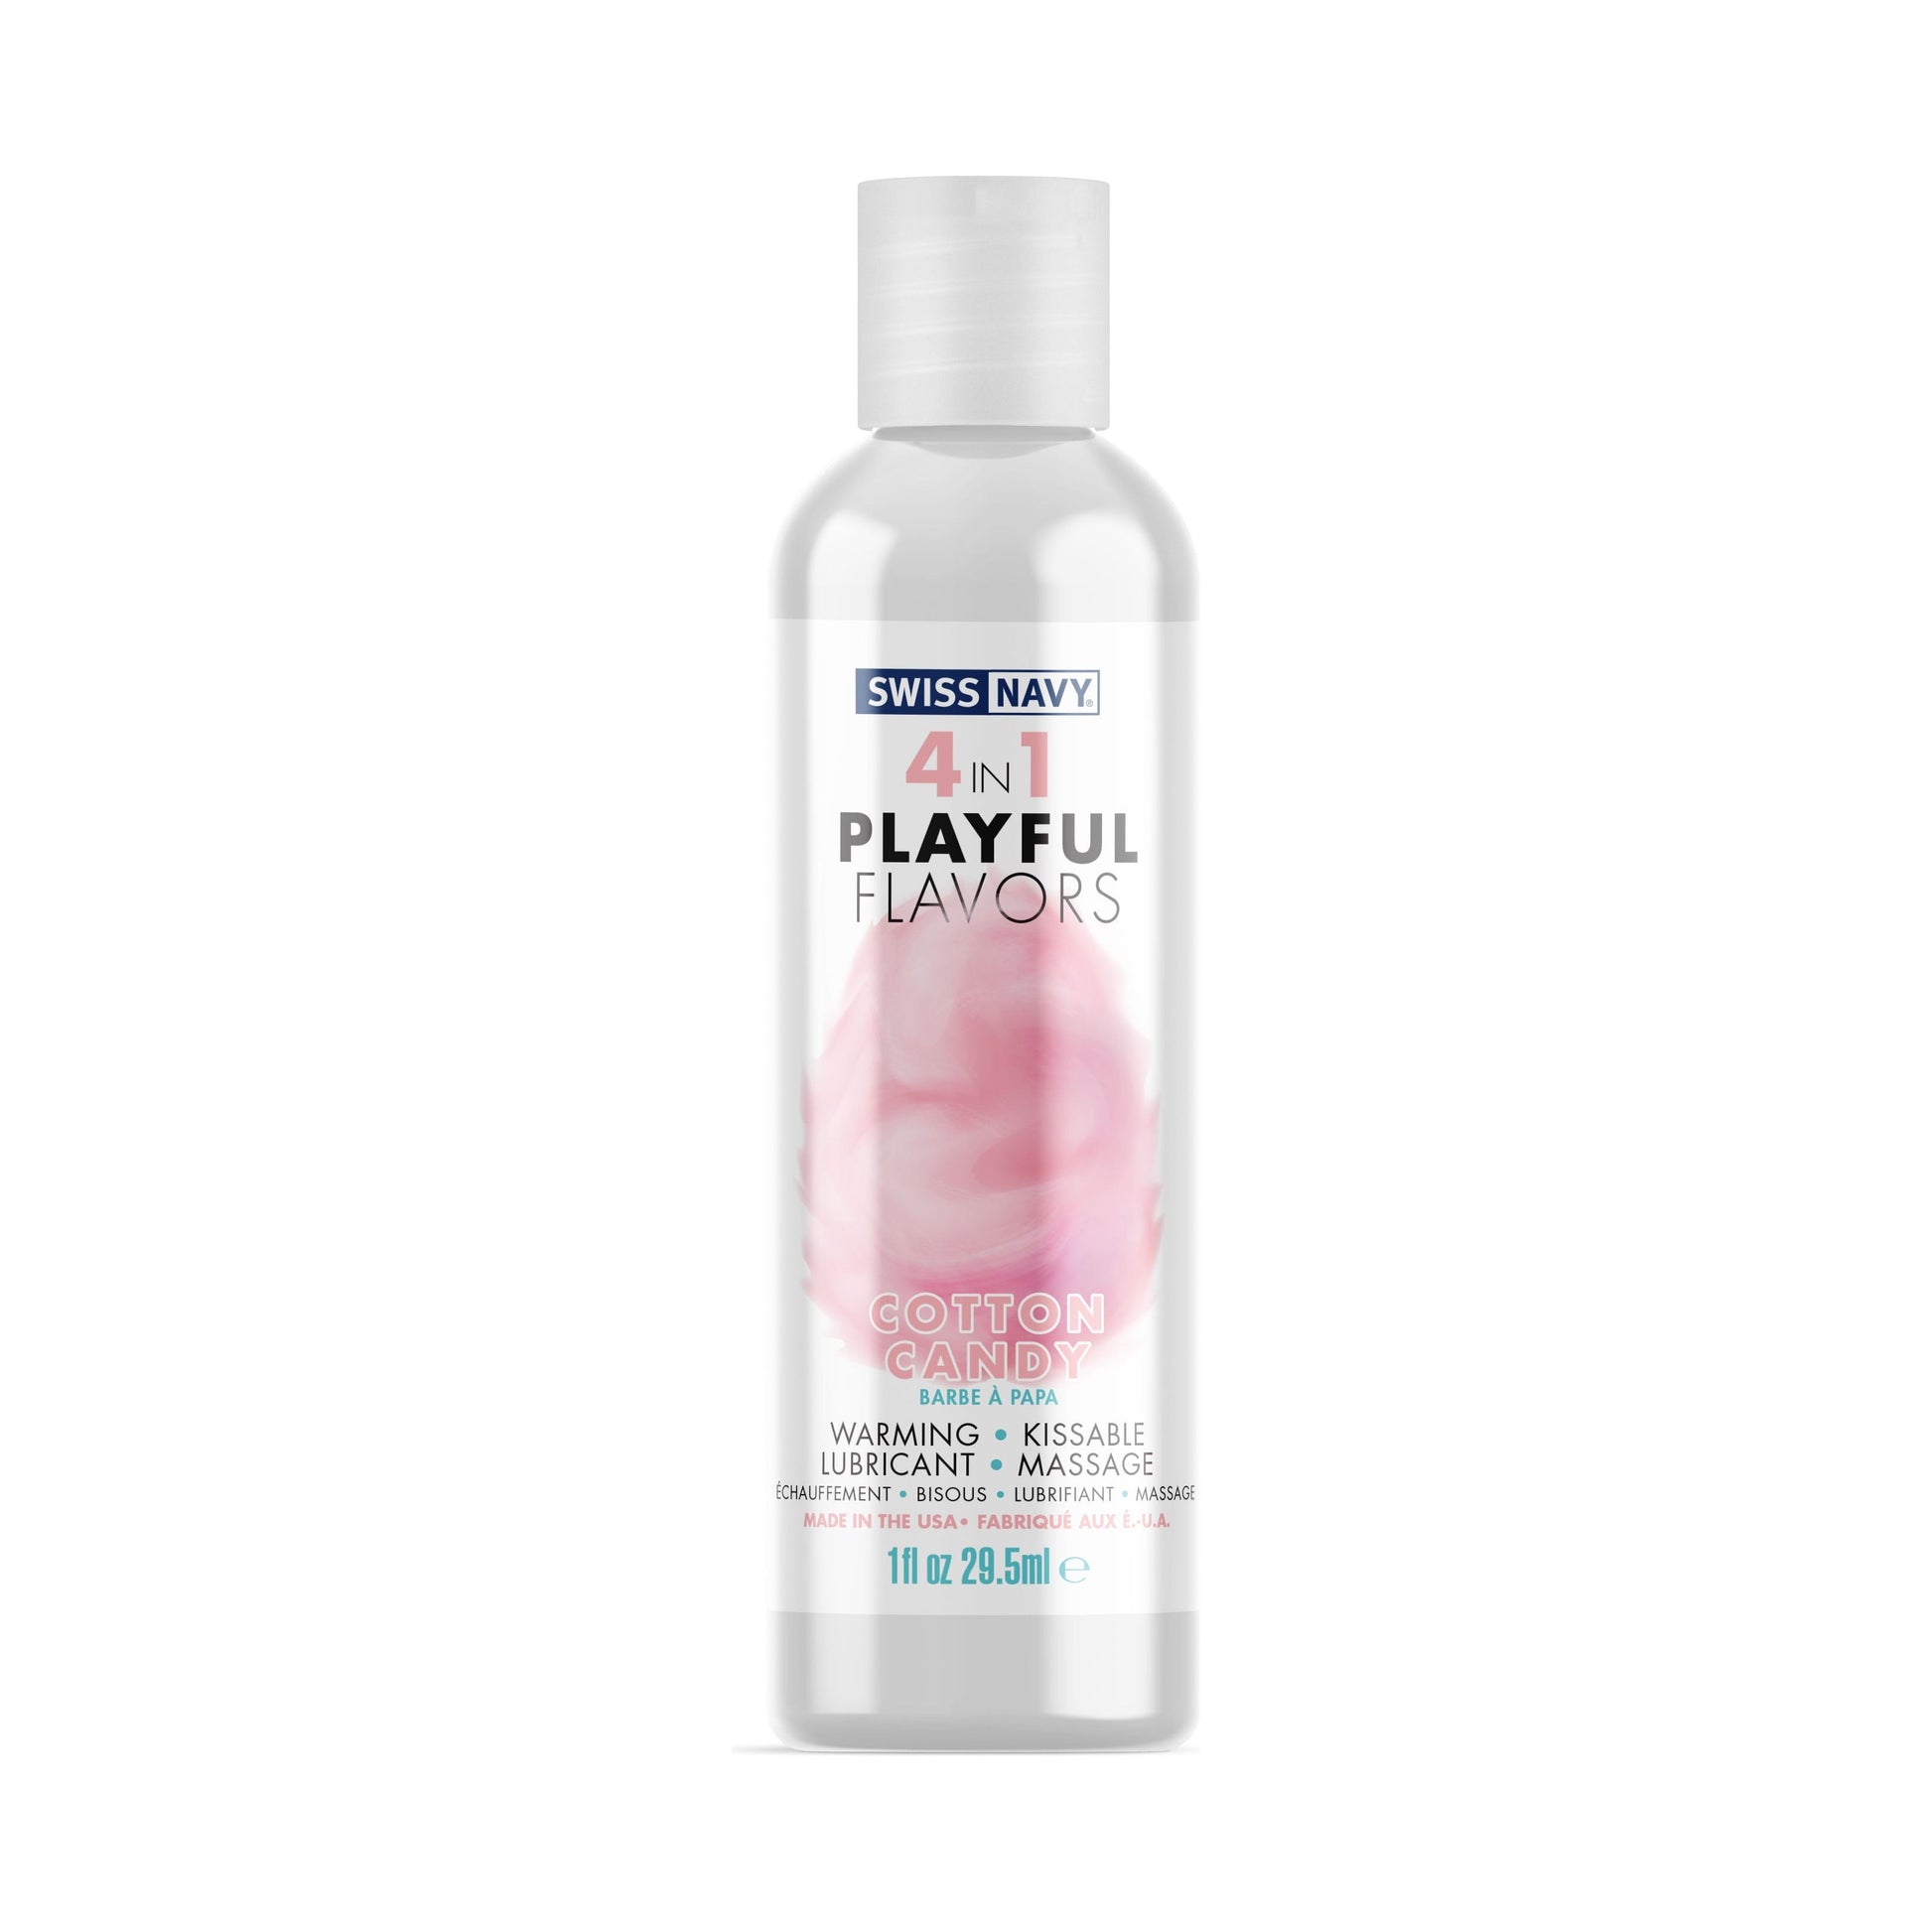 Swiss Navy 4-in-1 Playful Flavors - Cotton Candy 1 Oz MD-SN4N1FCC1